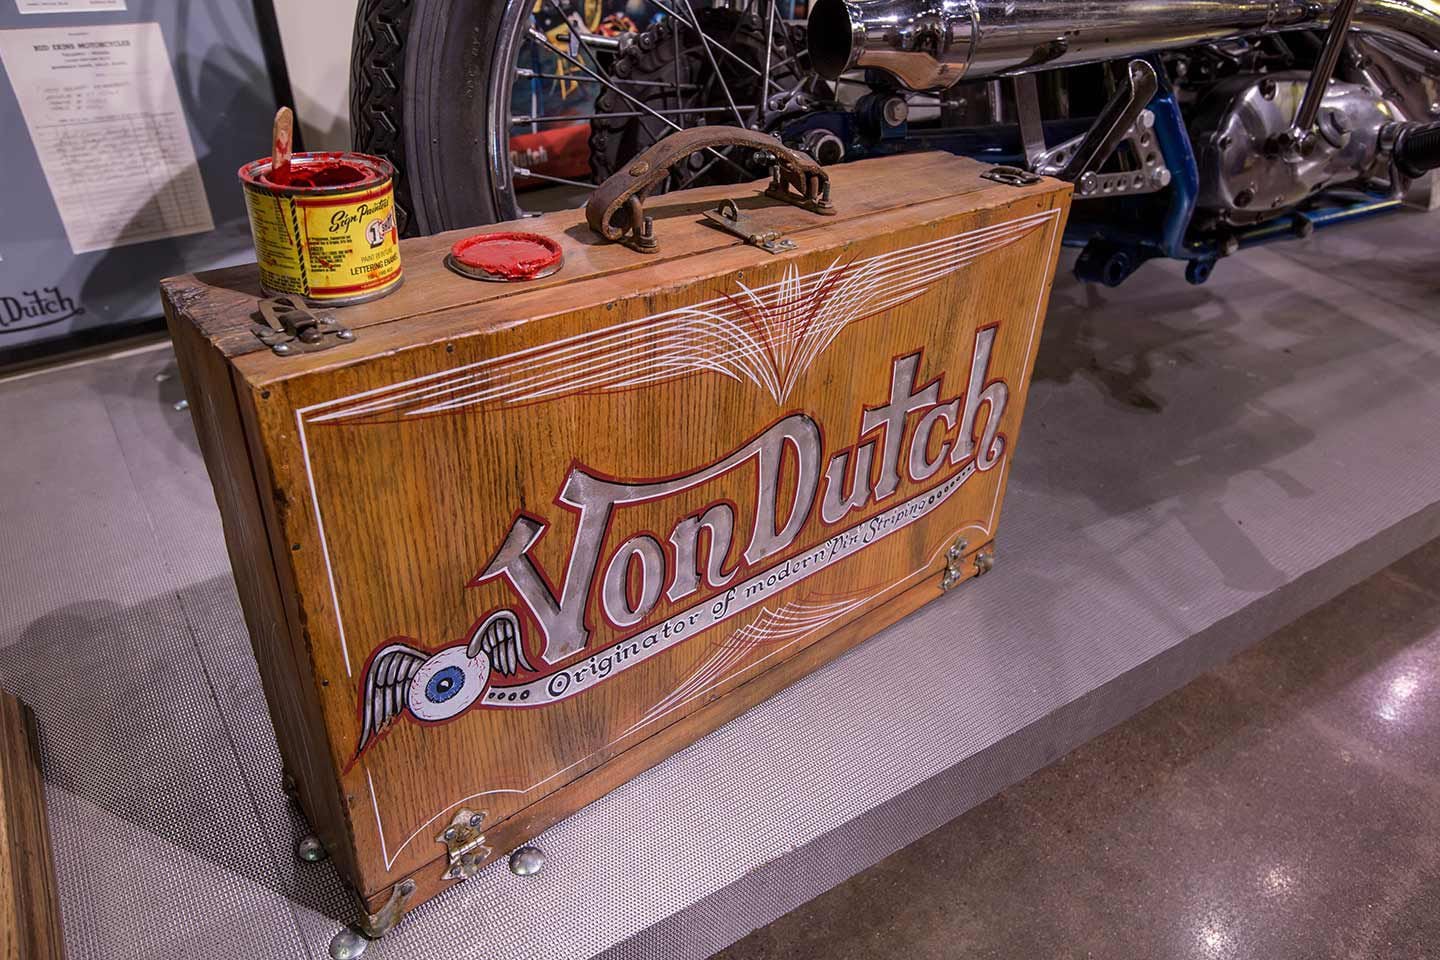 The museum had a wonderful collection of Von Dutch artwork, tools, and motorcycles on display.